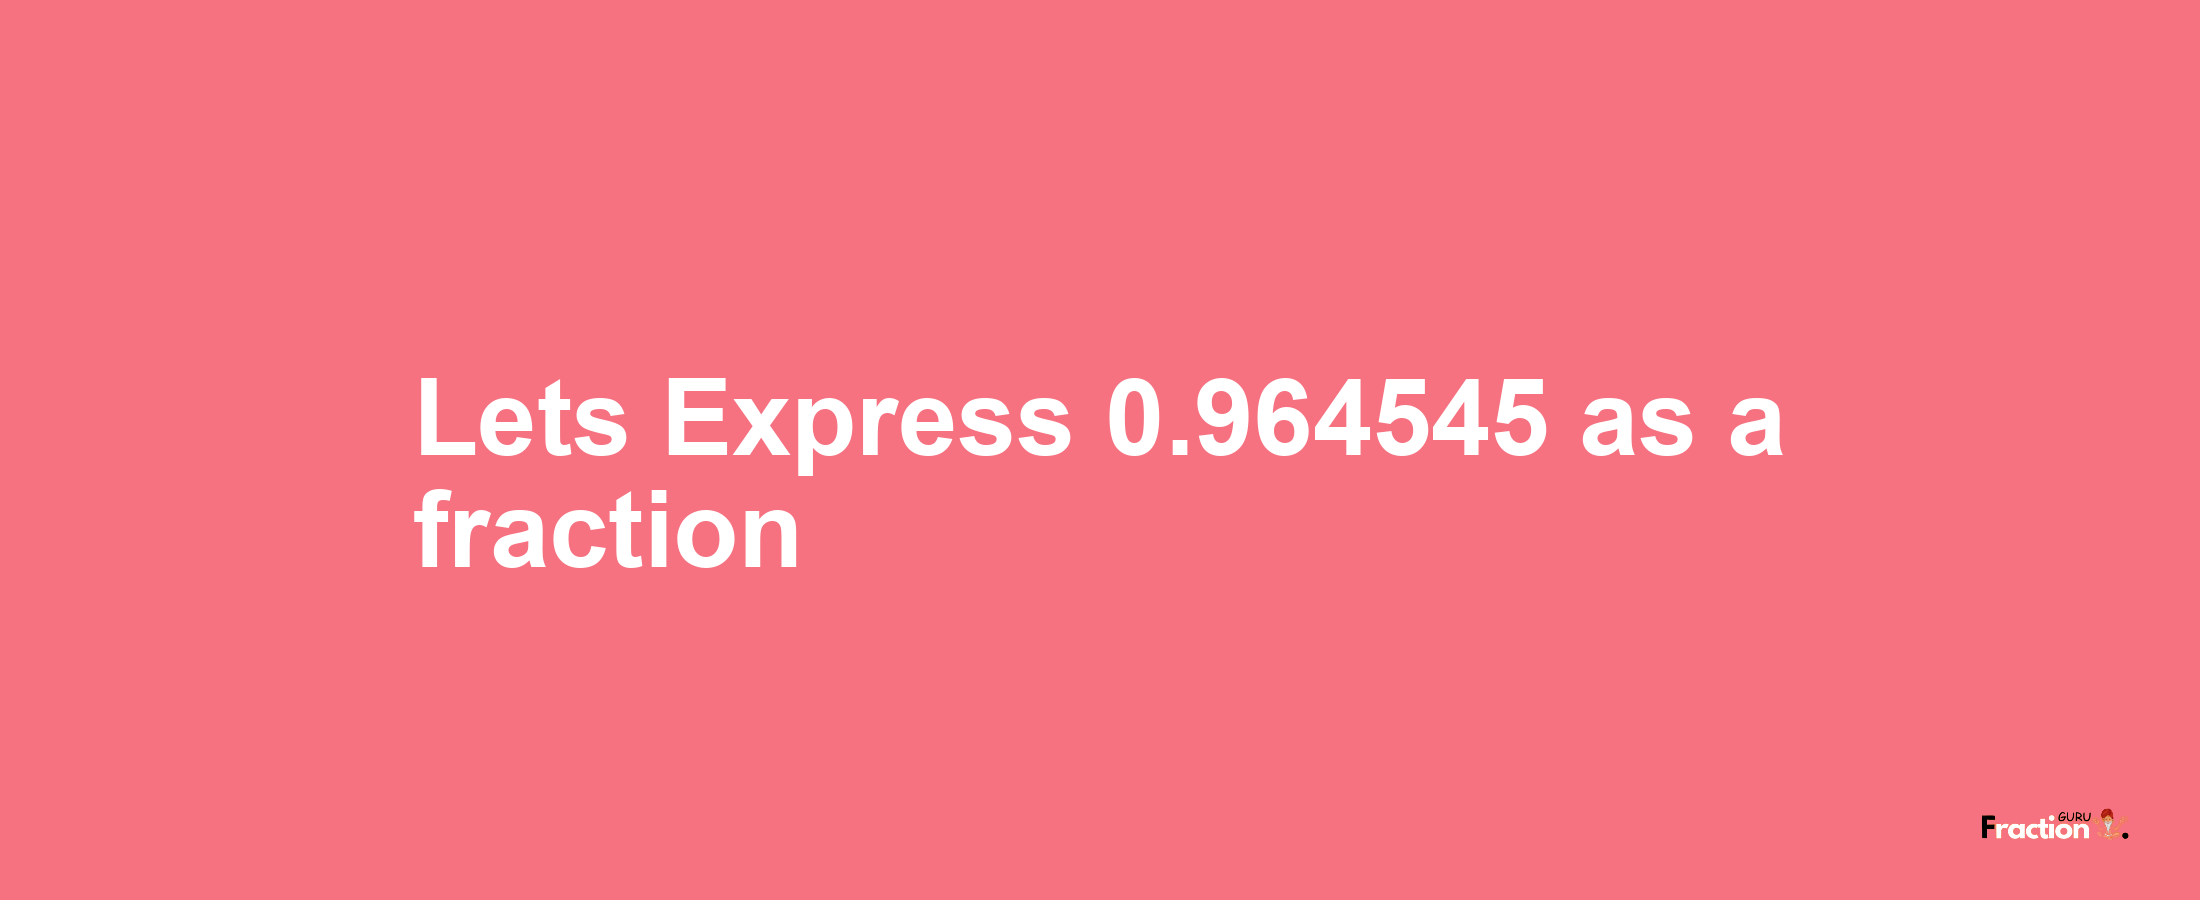 Lets Express 0.964545 as afraction